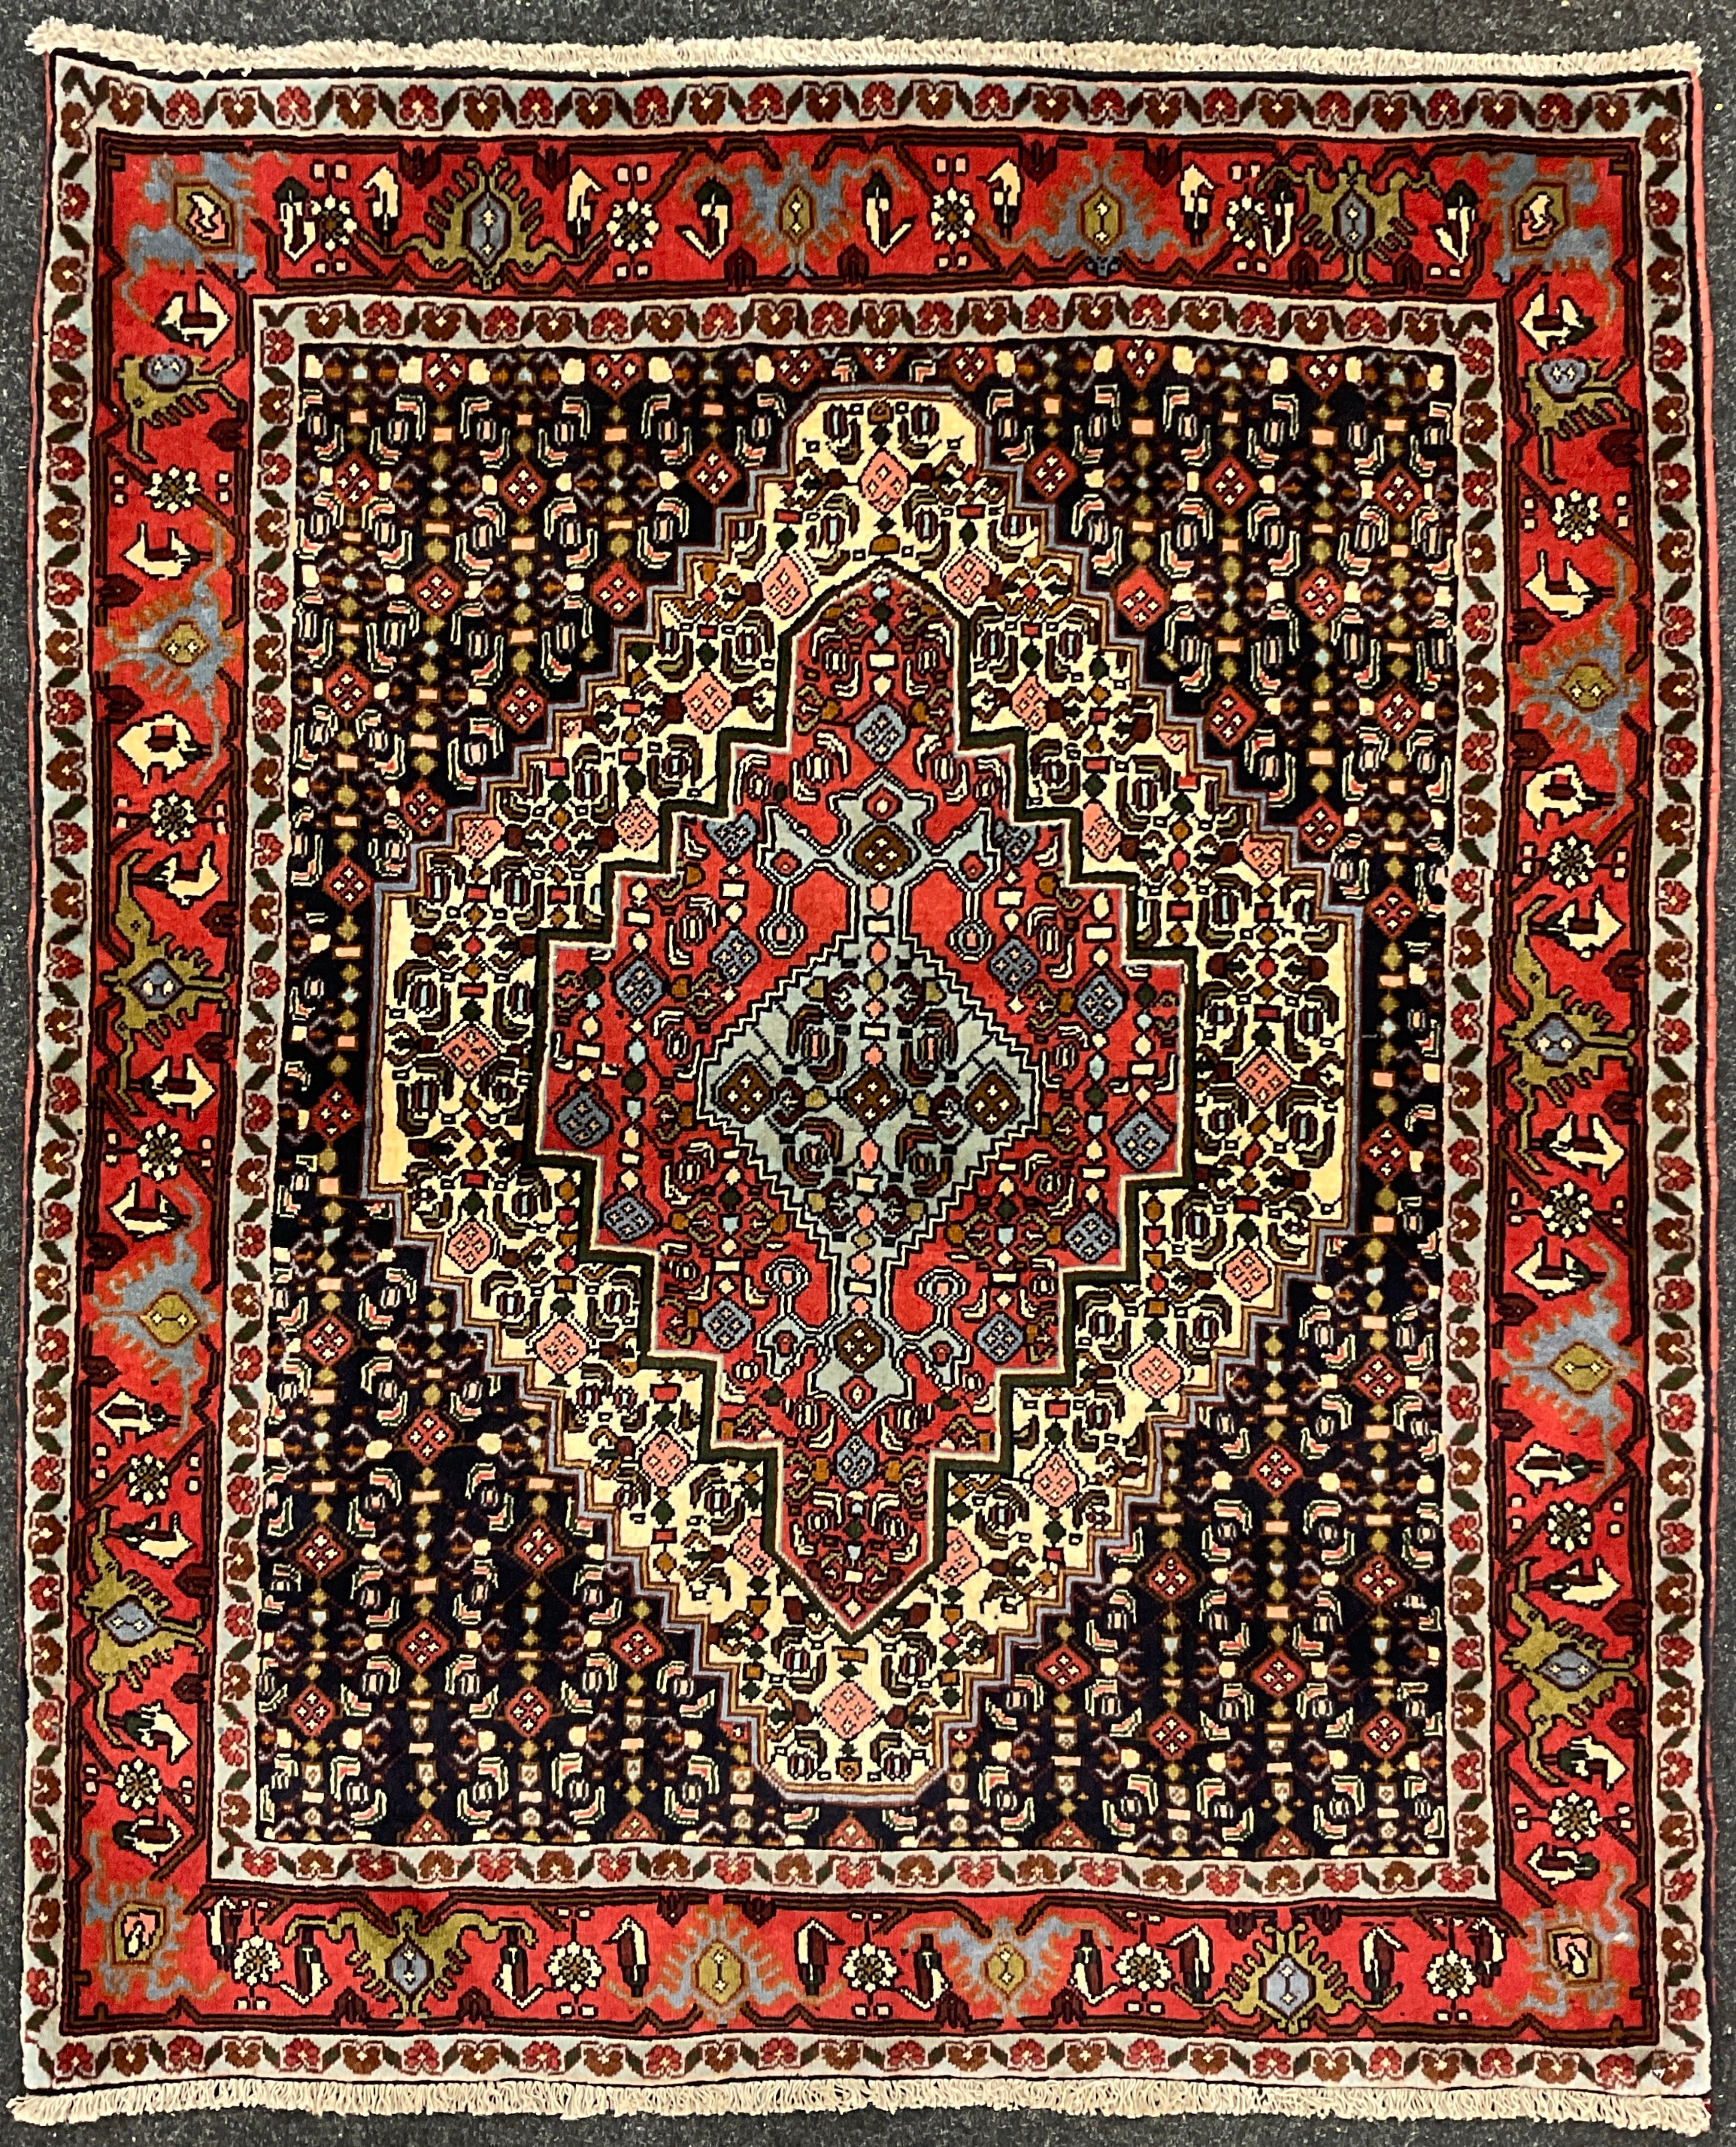 A North West Persian Senneh rug / carpet, hand-knotted with a central diamond-shaped medallion, in